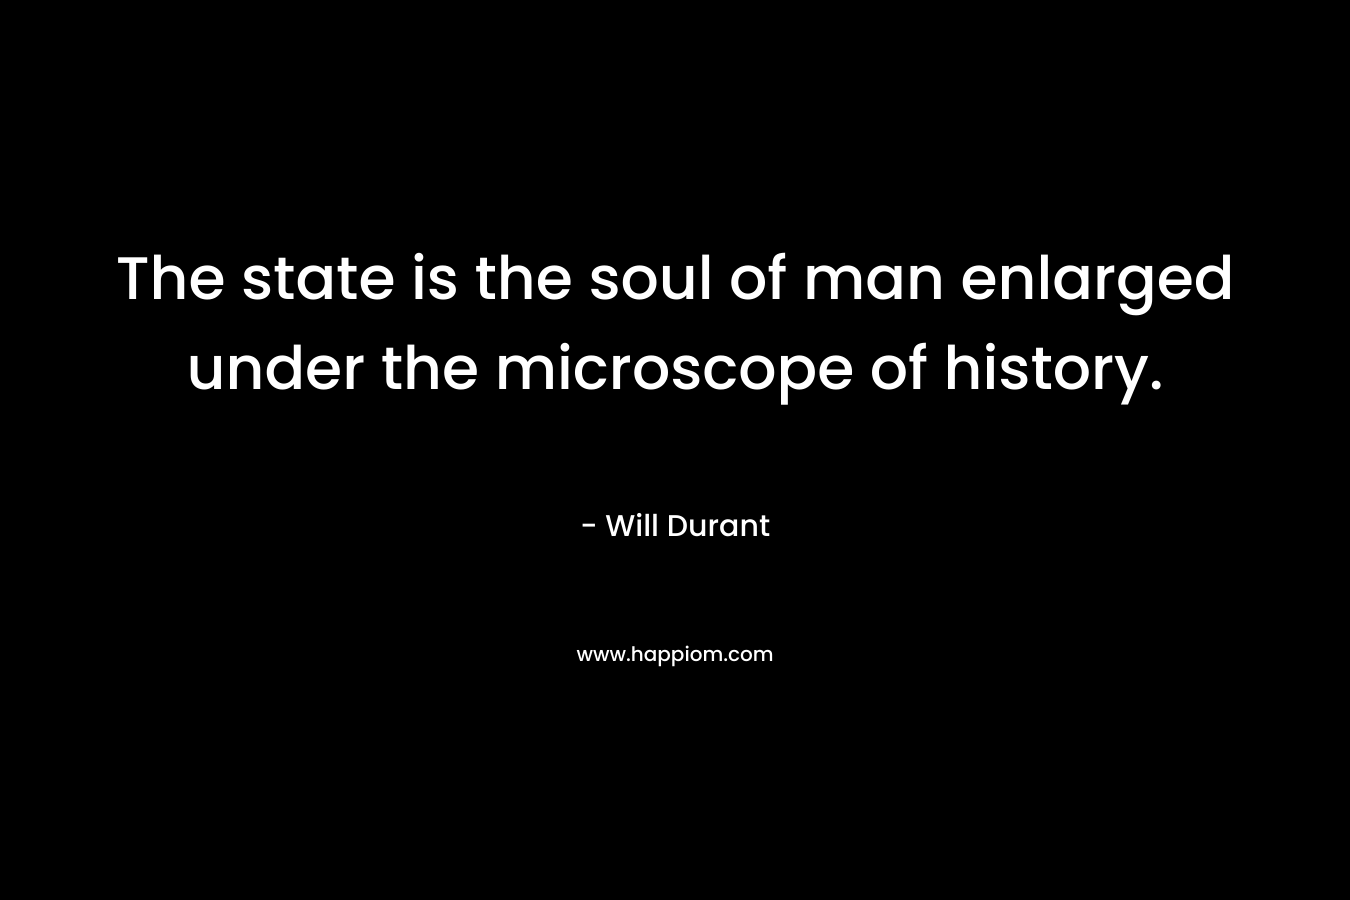 The state is the soul of man enlarged under the microscope of history. – Will Durant